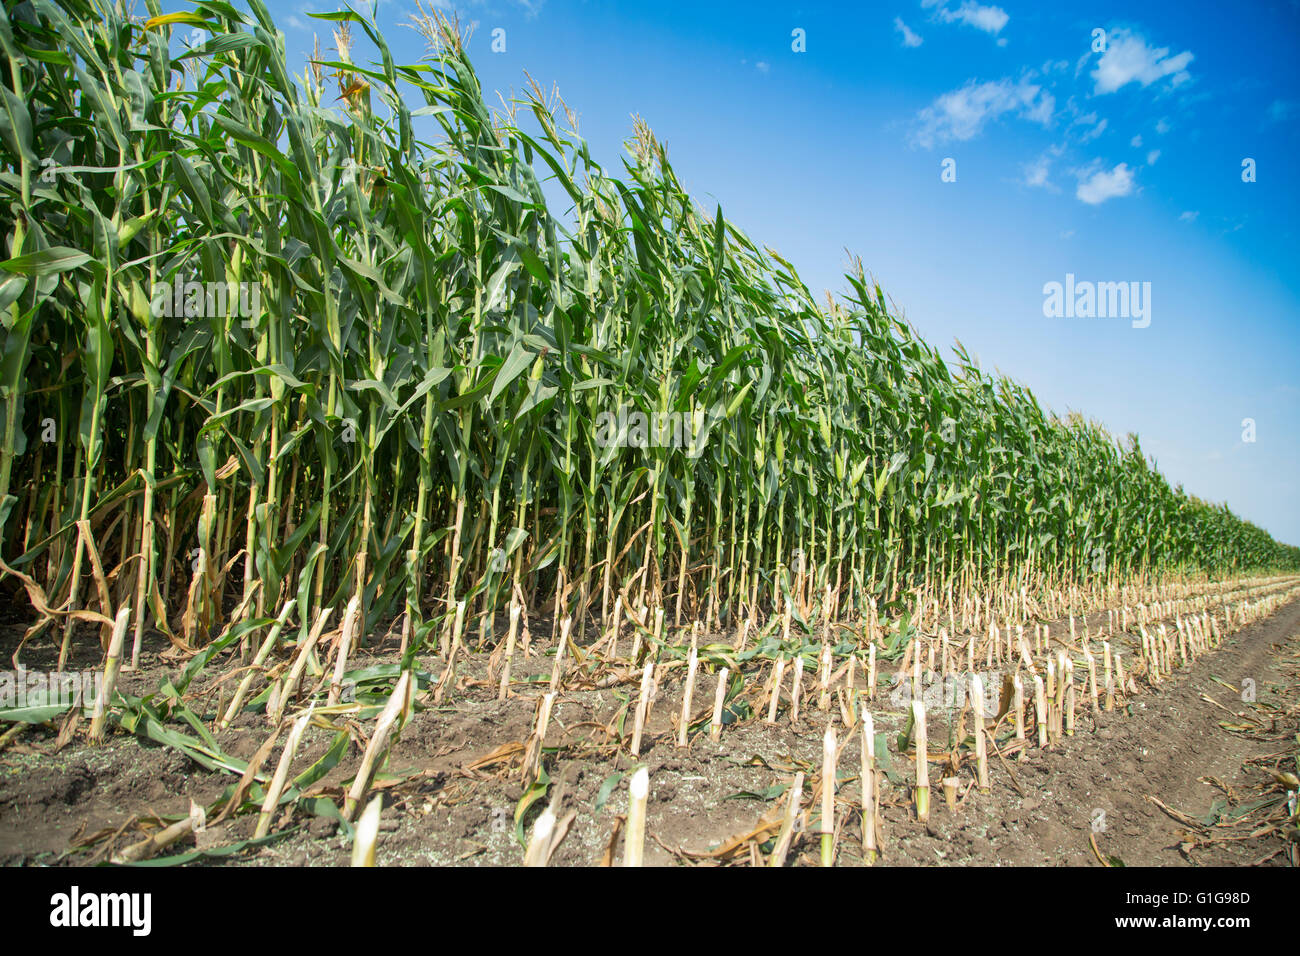 Silage corn maize green stems cut on field Stock Photo